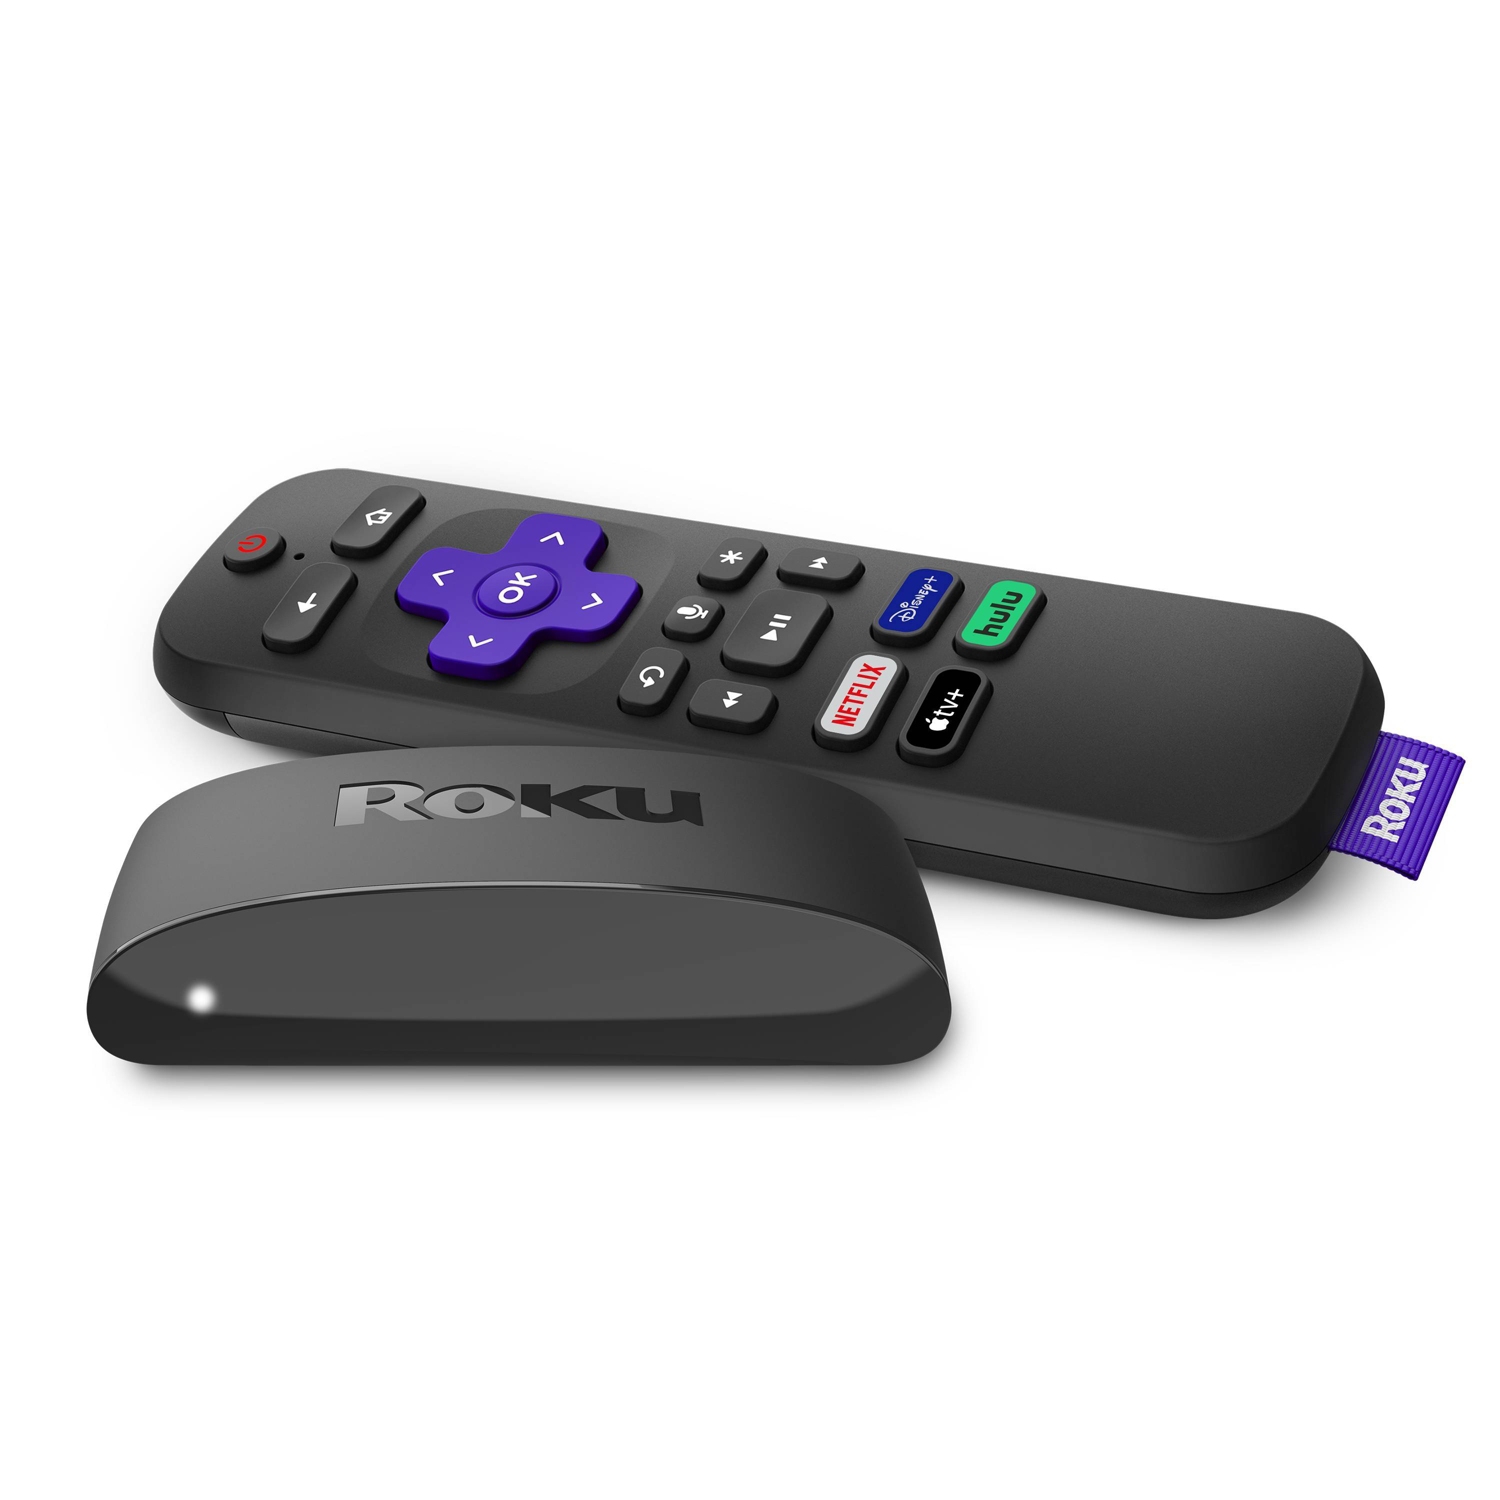 Roku Express 4K+ 2021| 4K/HDR/HD Streaming Media Player with Smooth Wireless Streaming, Voice Remote, TV Controls, and HDMI Cable - $29.99